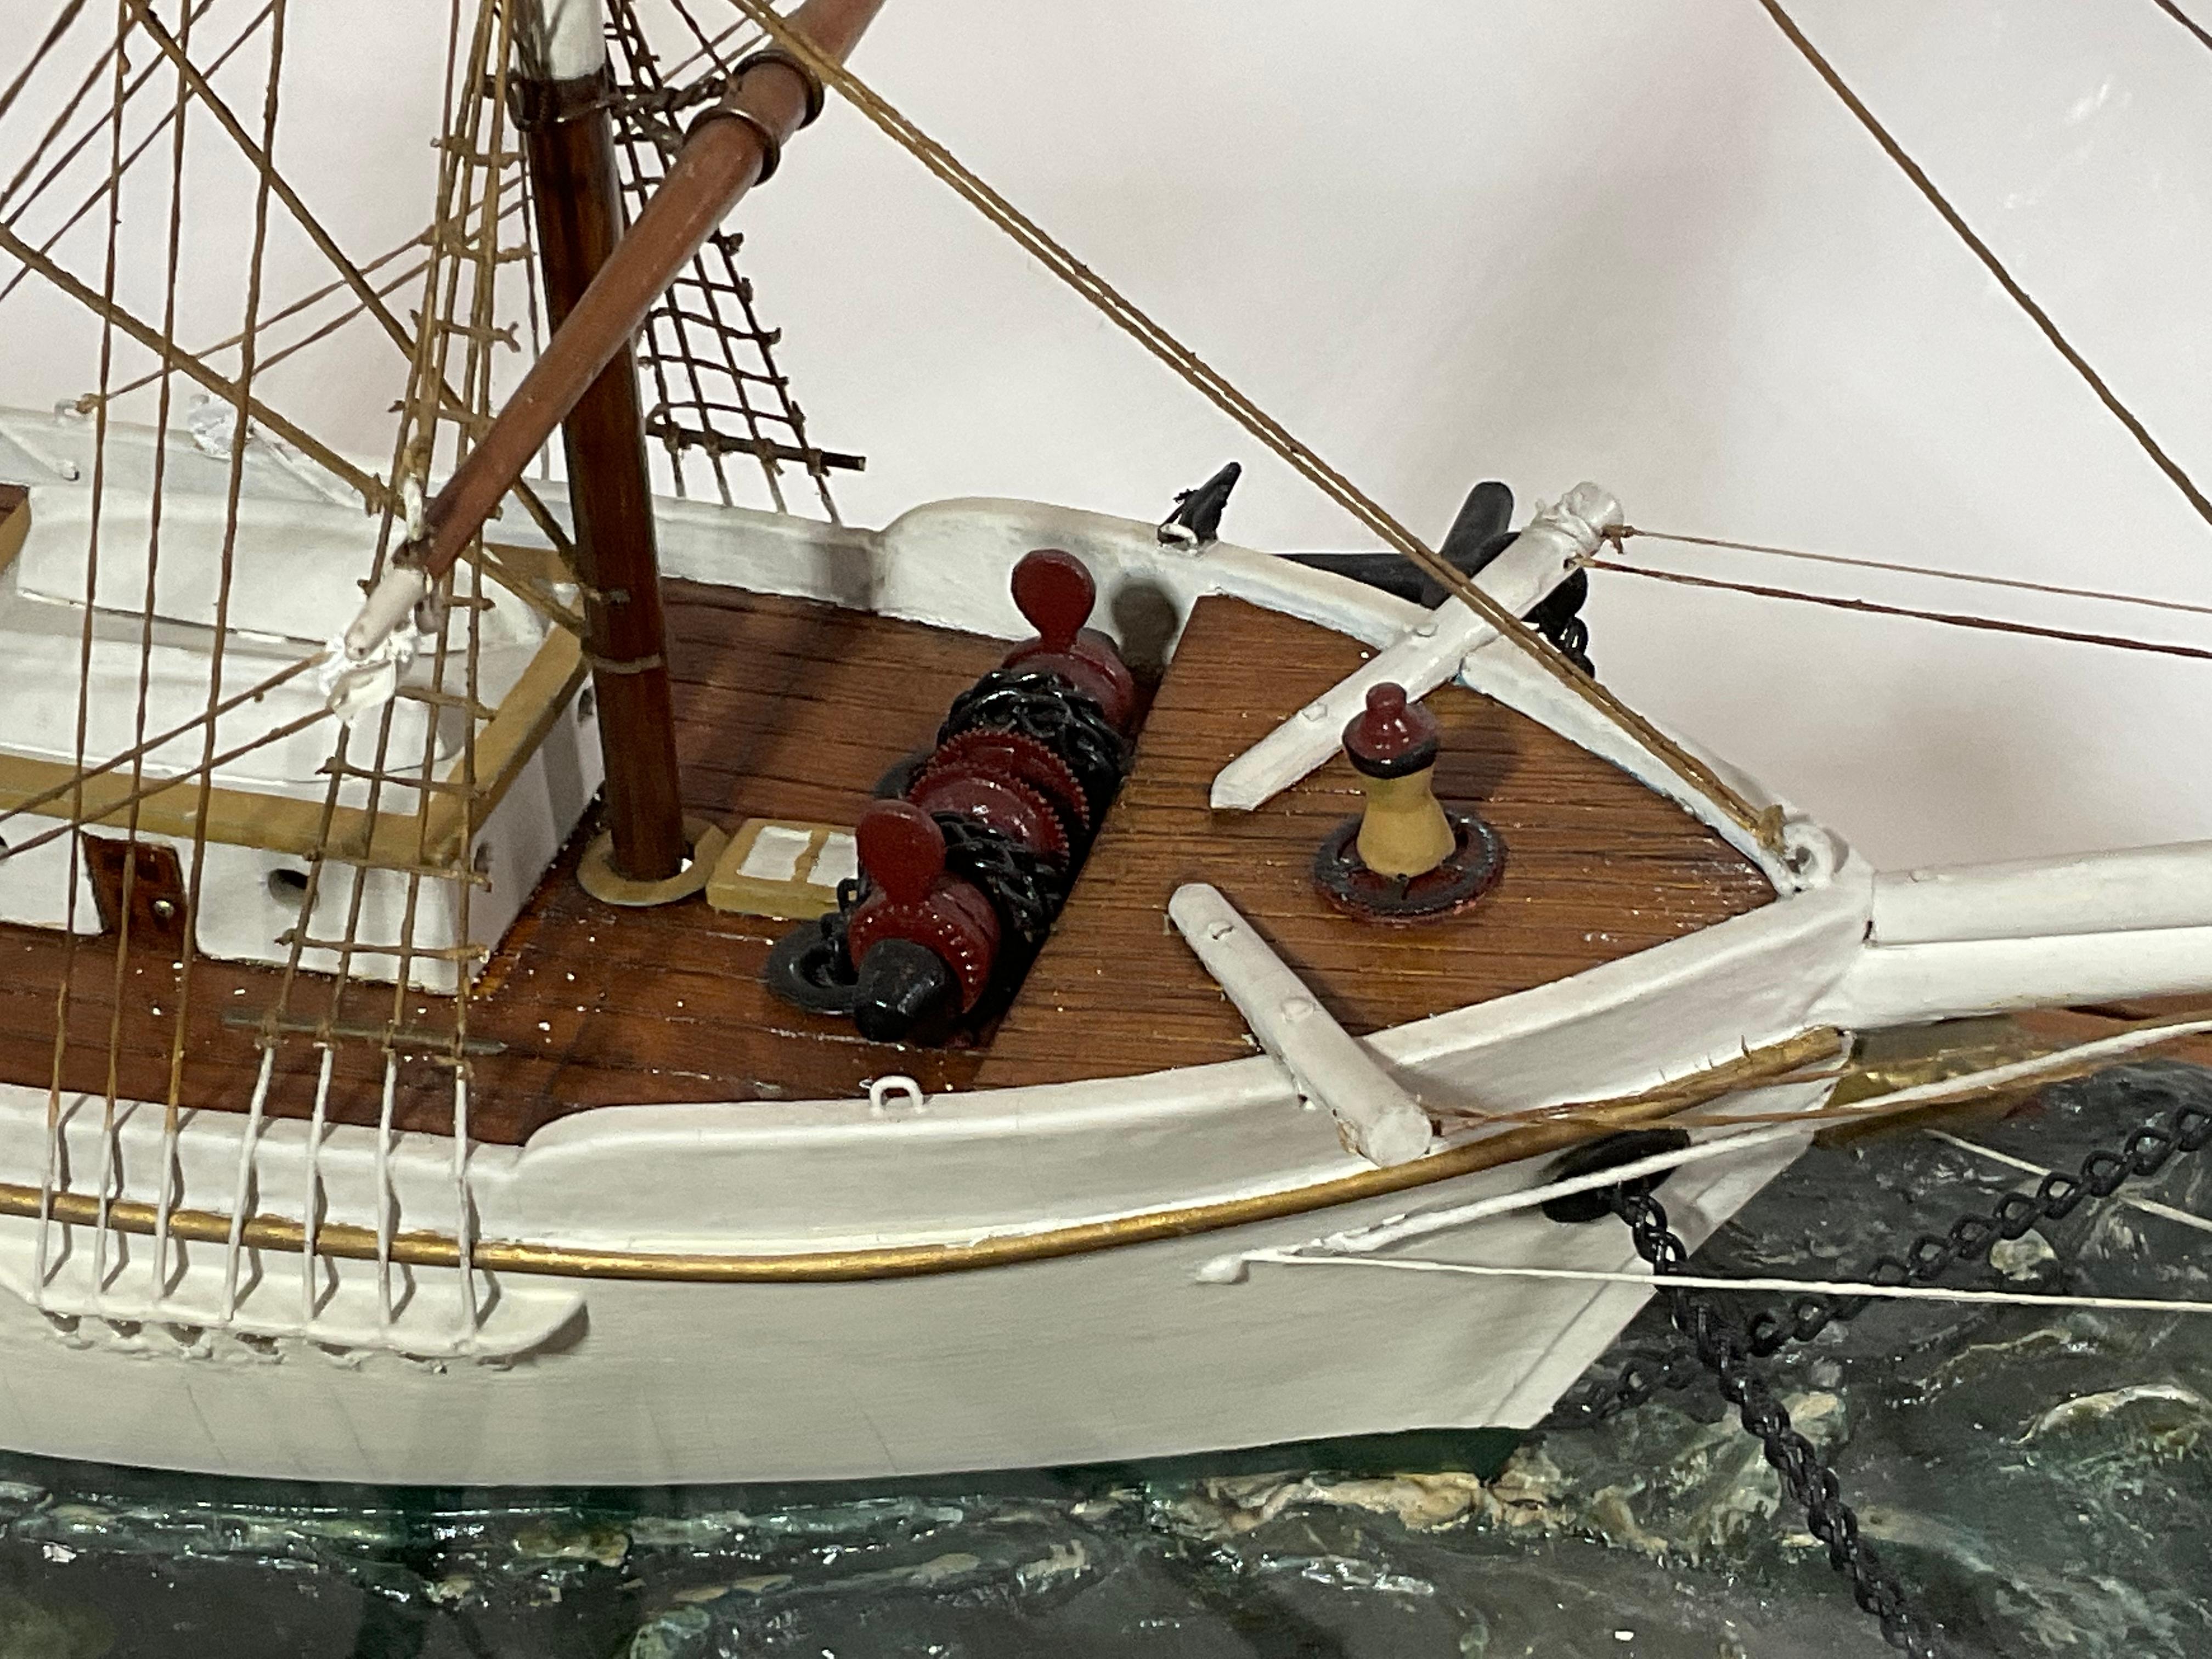 Small Wood Cased Ship Model 